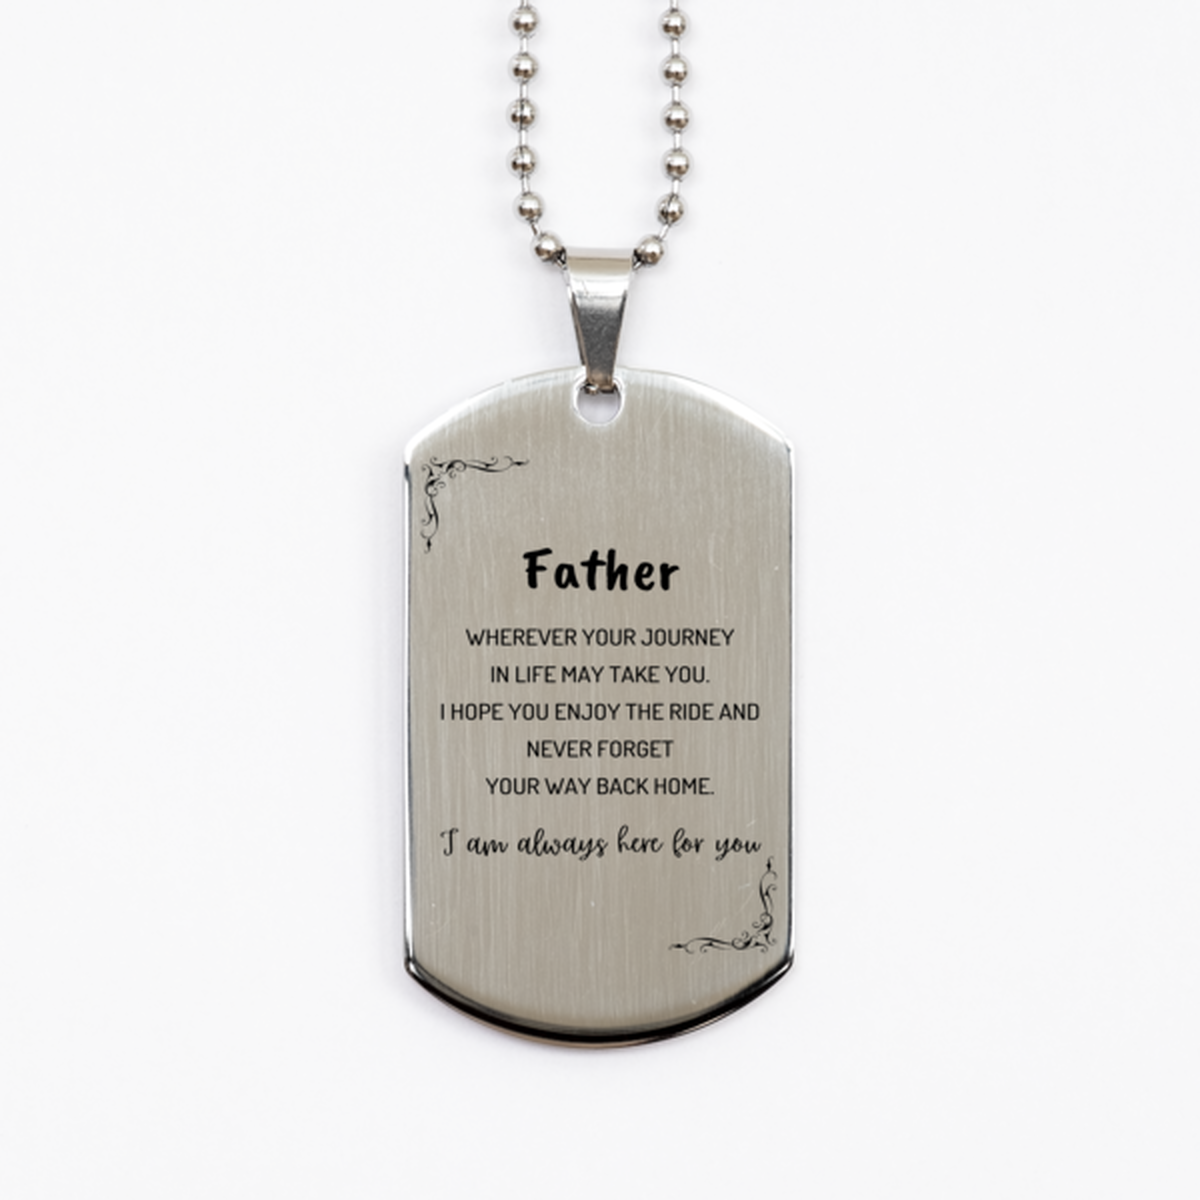 Father wherever your journey in life may take you, I am always here for you Father Silver Dog Tag, Awesome Christmas Gifts For Father, Father Birthday Gifts for Men Women Family Loved One